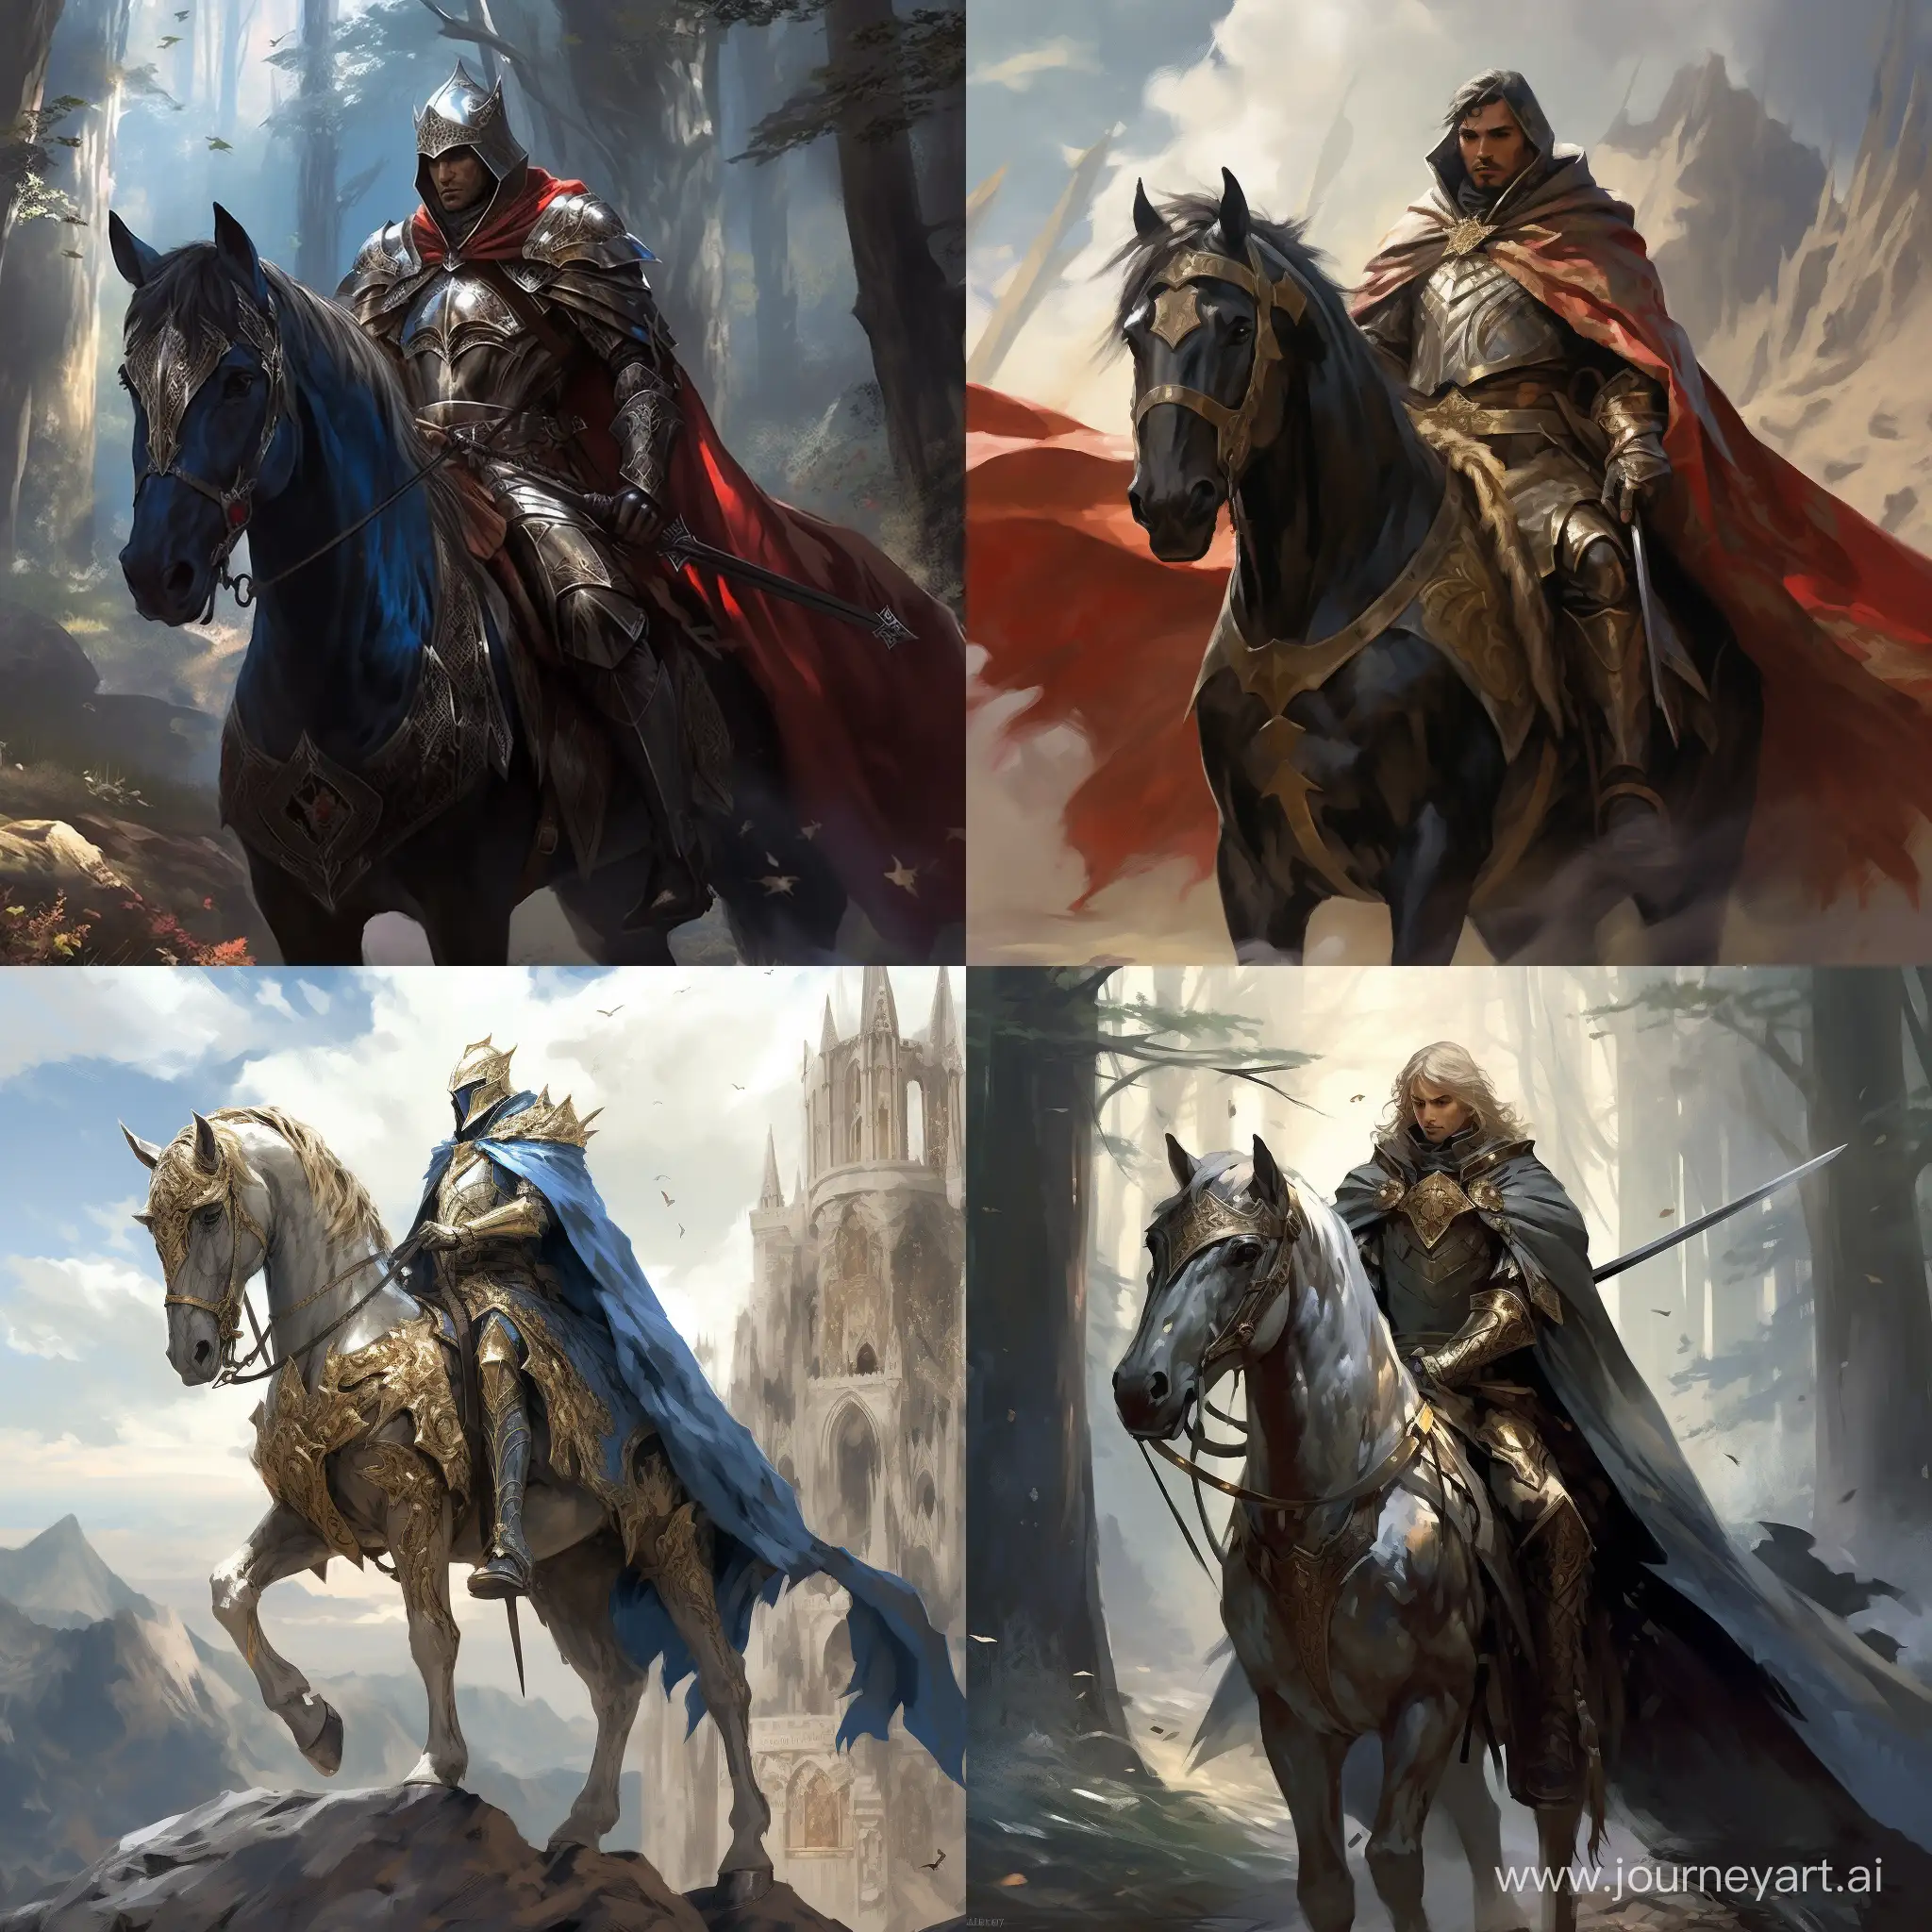 Majestic-Knight-Riding-Horse-with-Elegant-Cloak-in-Fantasy-Landscape